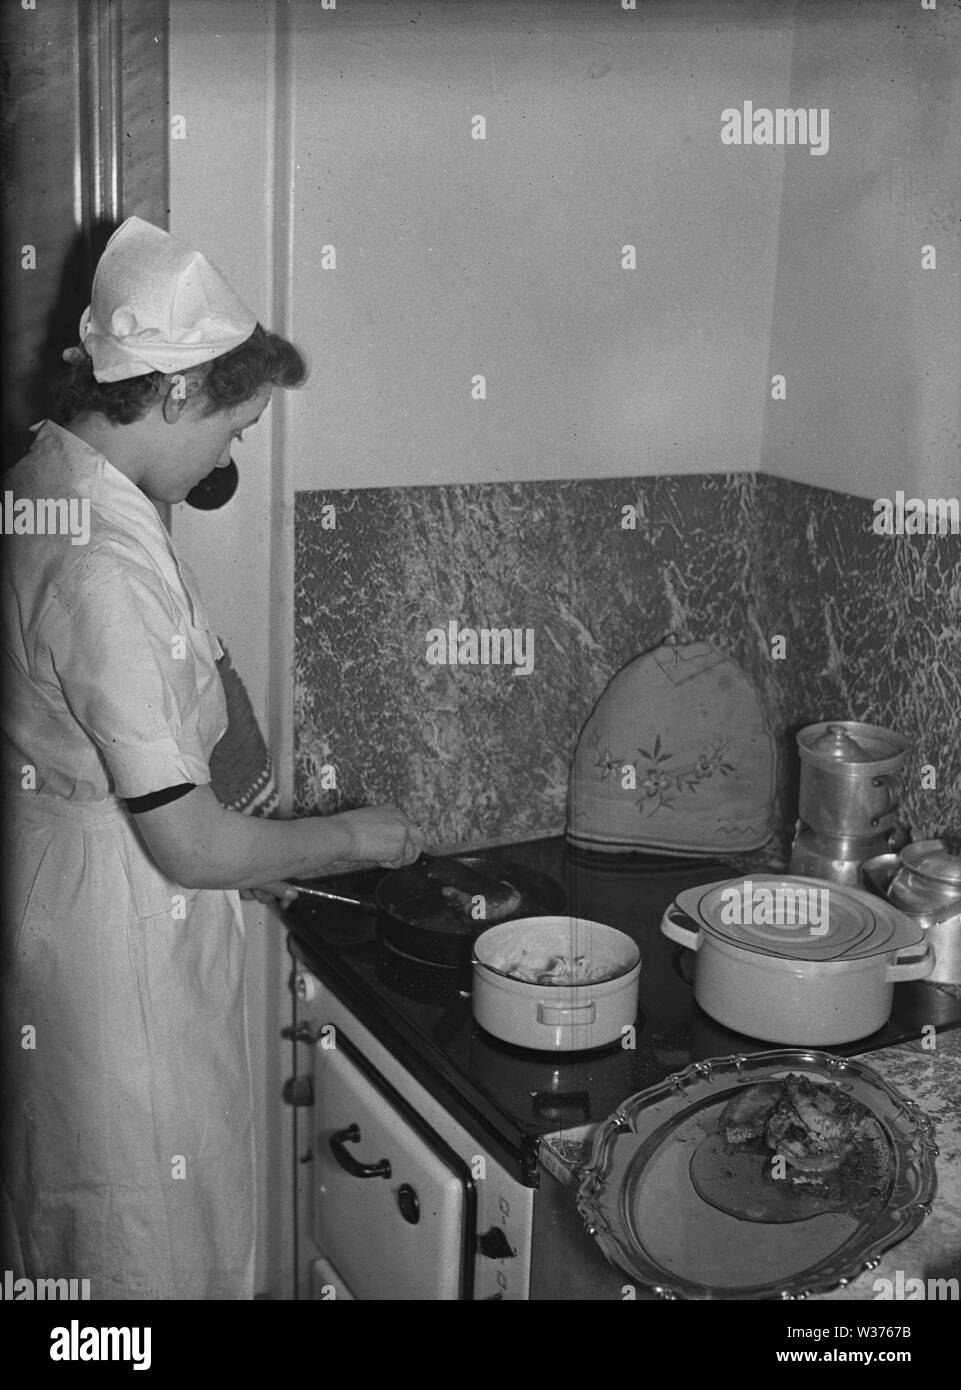 Cooking in the 1940s. A young woman employed as a house maid is cooking a meal on the kitchen stove. Sweden 1940. Kristoffersson ref 55-5 Stock Photo